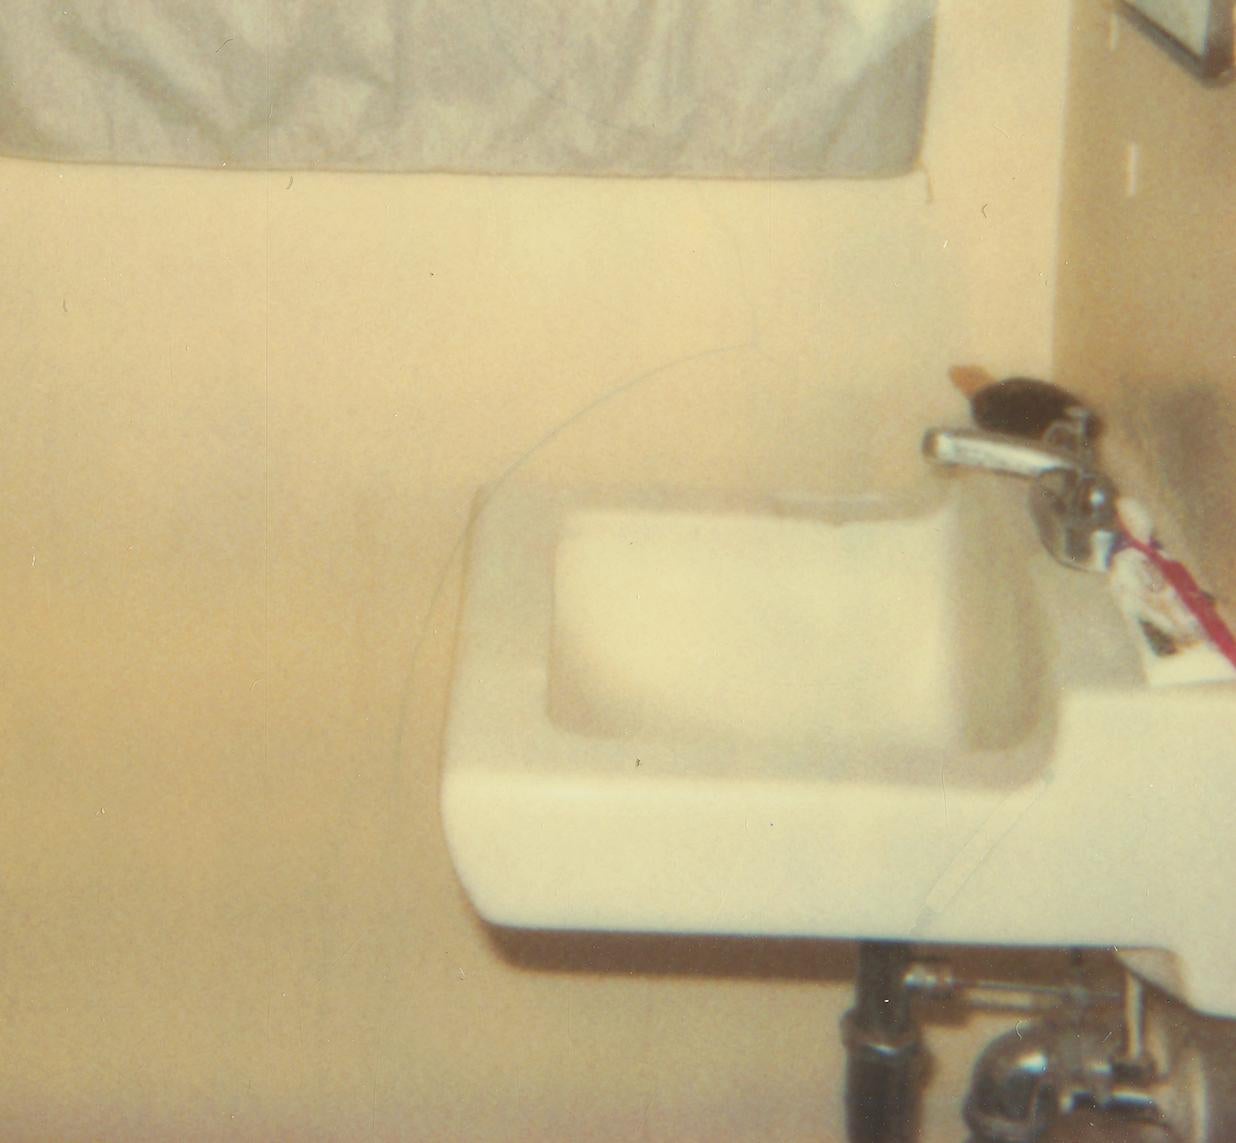 Bathroom (29 Palms, CA) - 1999

58x56cm, 
Edition of 10, plus 2 Artist Proofs. 
Analog C-Print, hand-printed by the artist, based on the Polaroid. 
Signature label and Certificate, 
artist inventory number: 606. 
Not mounted. 

Published in: 29